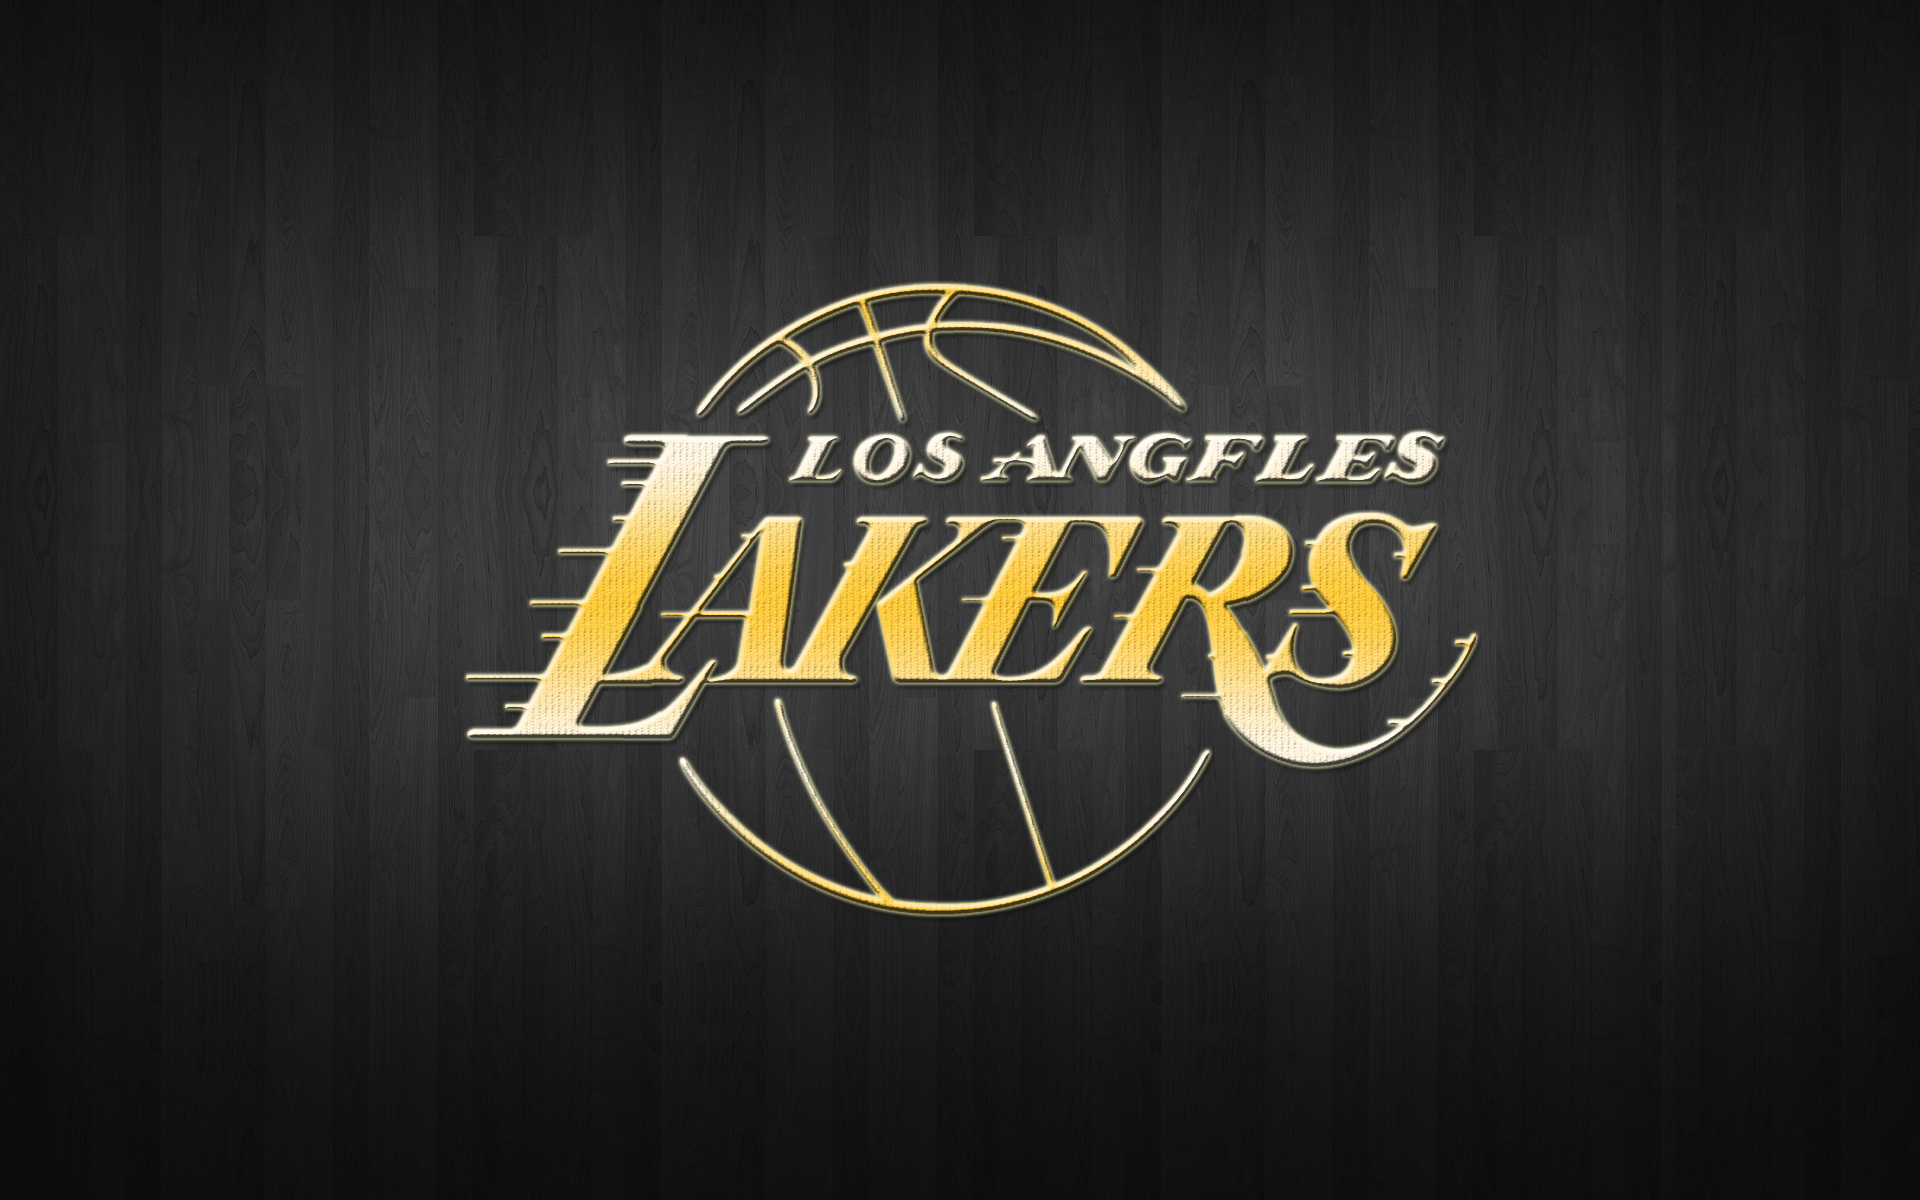 Los Angeles Lakers Hd Wallpaper Background Image 1920x1200